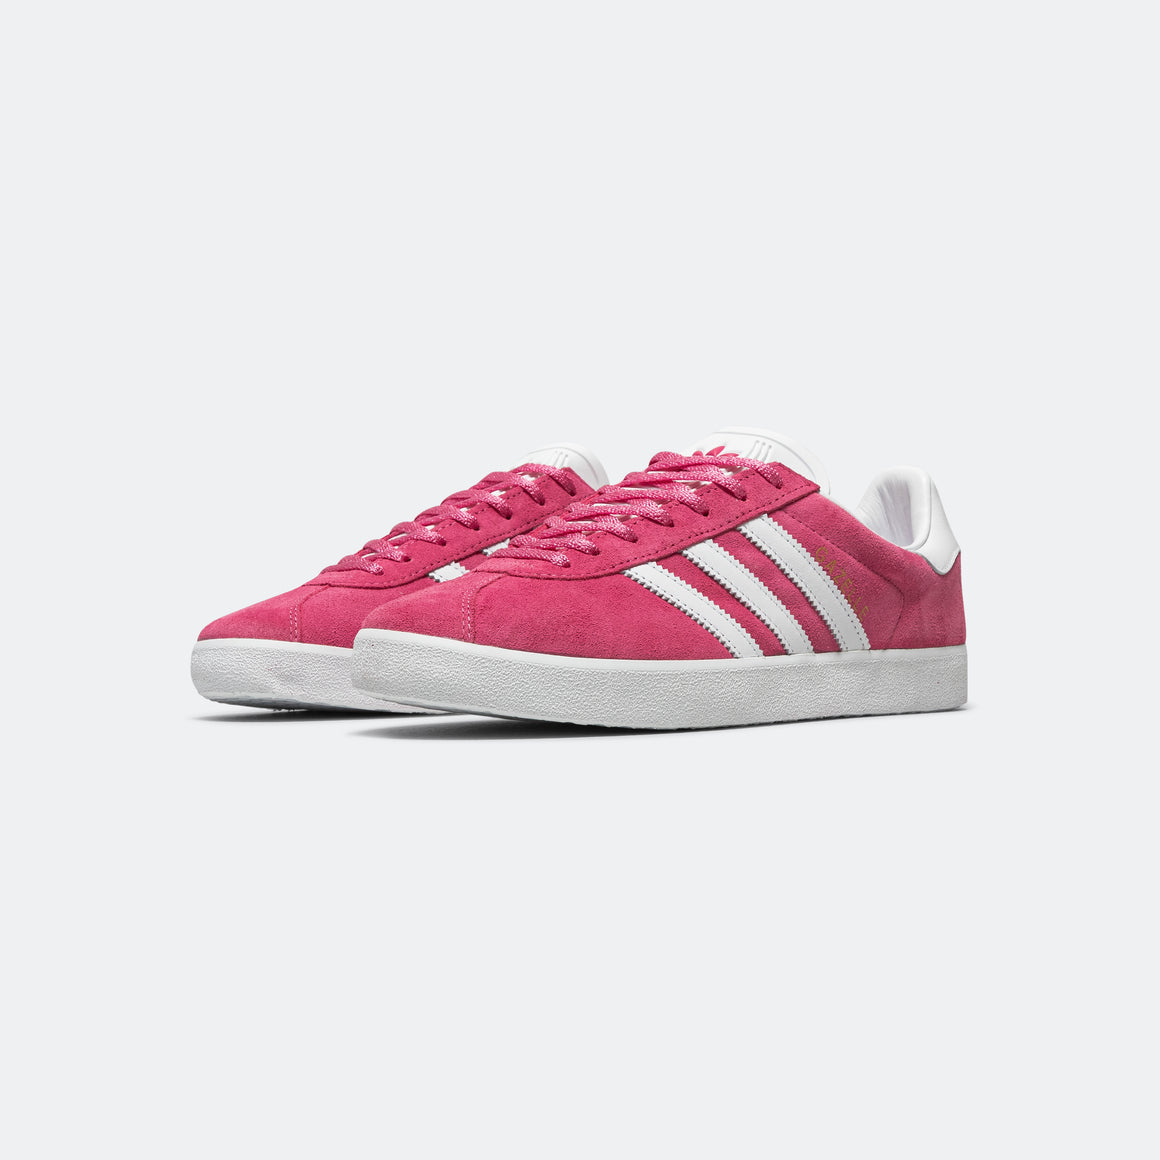 adidas - Gazelle 85 - Pink Fusion/Footwear White - UP THERE